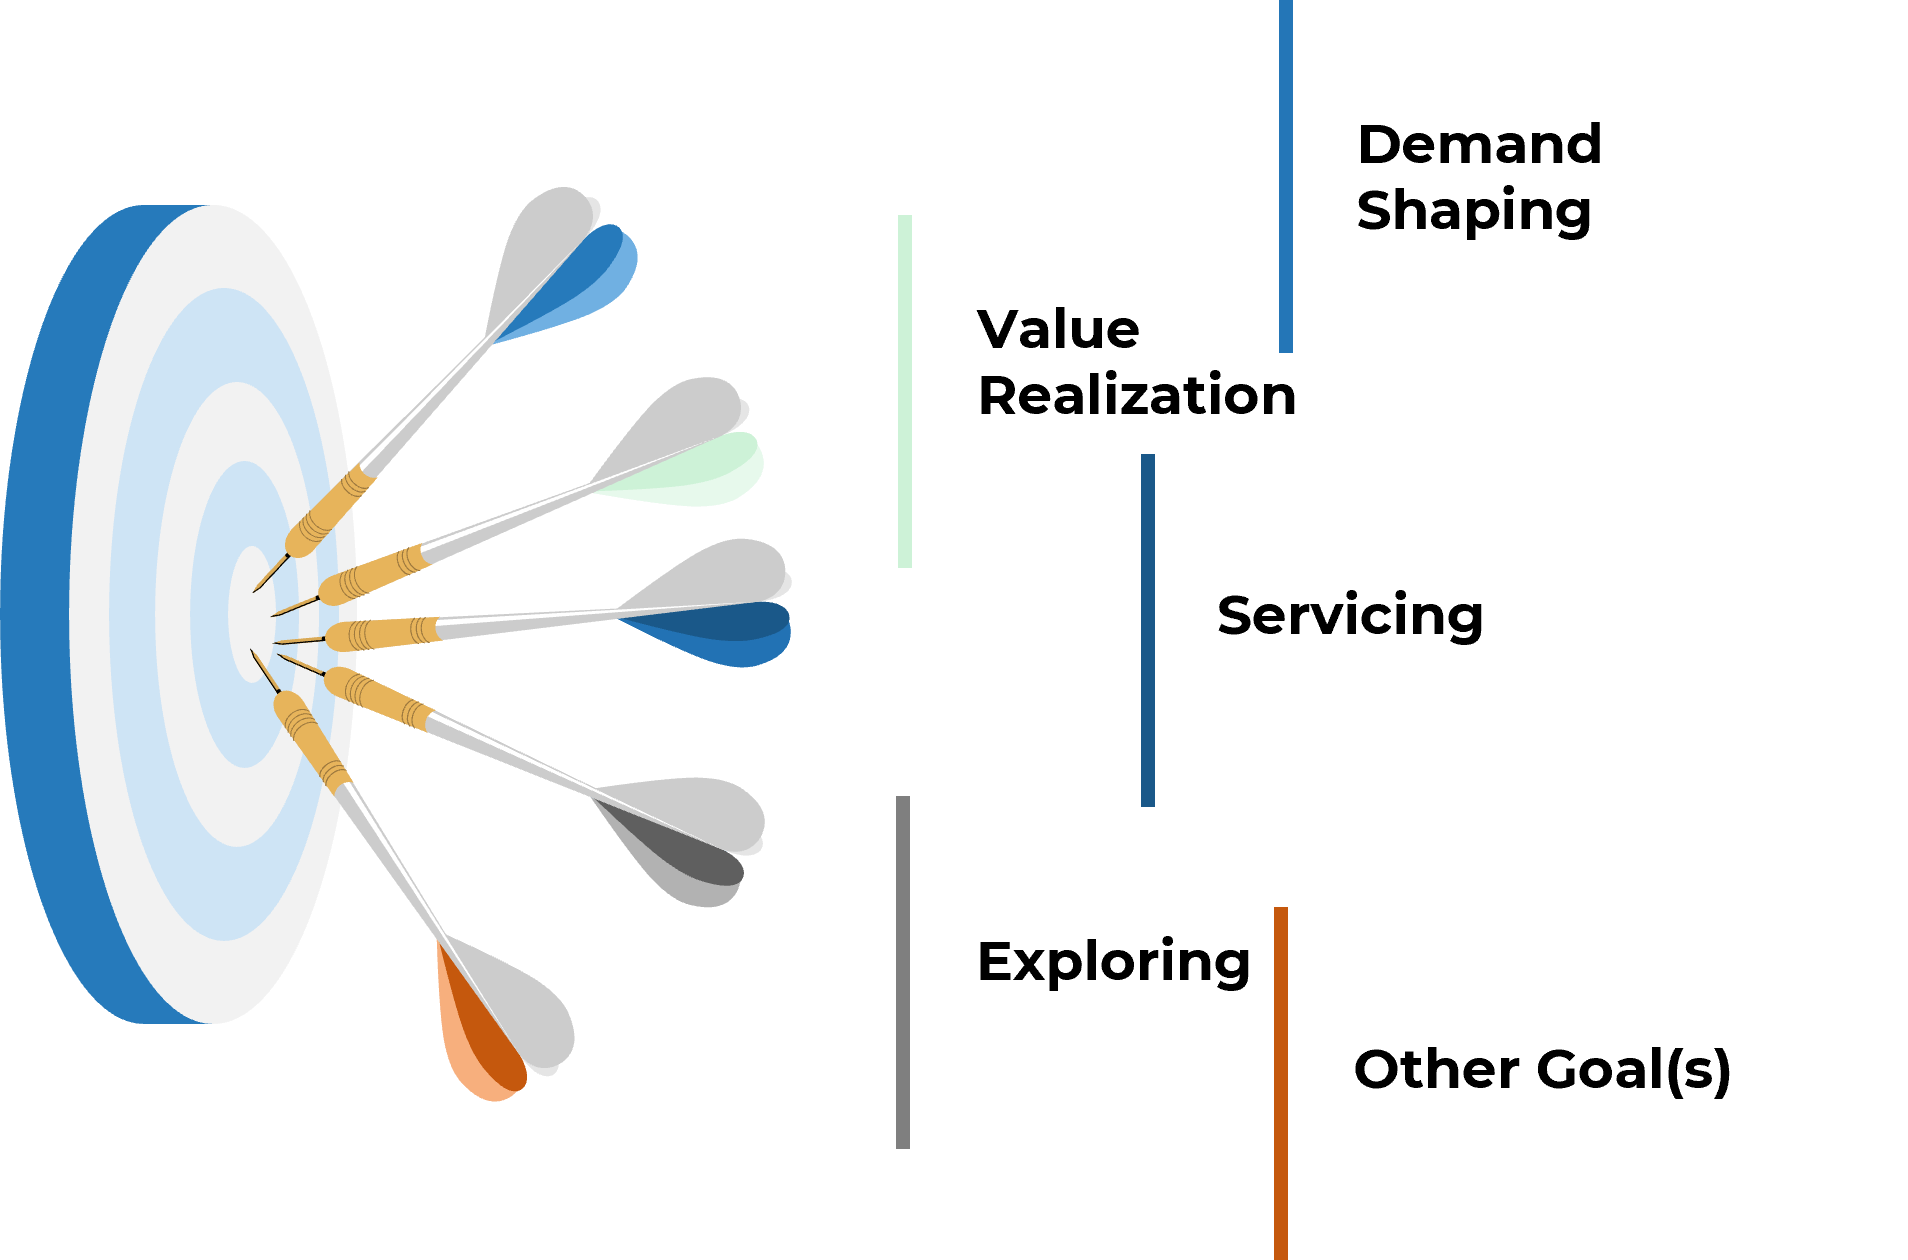 Dart board with five darts, each representing a goal, 'Demand Shaping', 'Value Realization', 'Servicing', 'Exploring', and 'Other Goal(s)'.